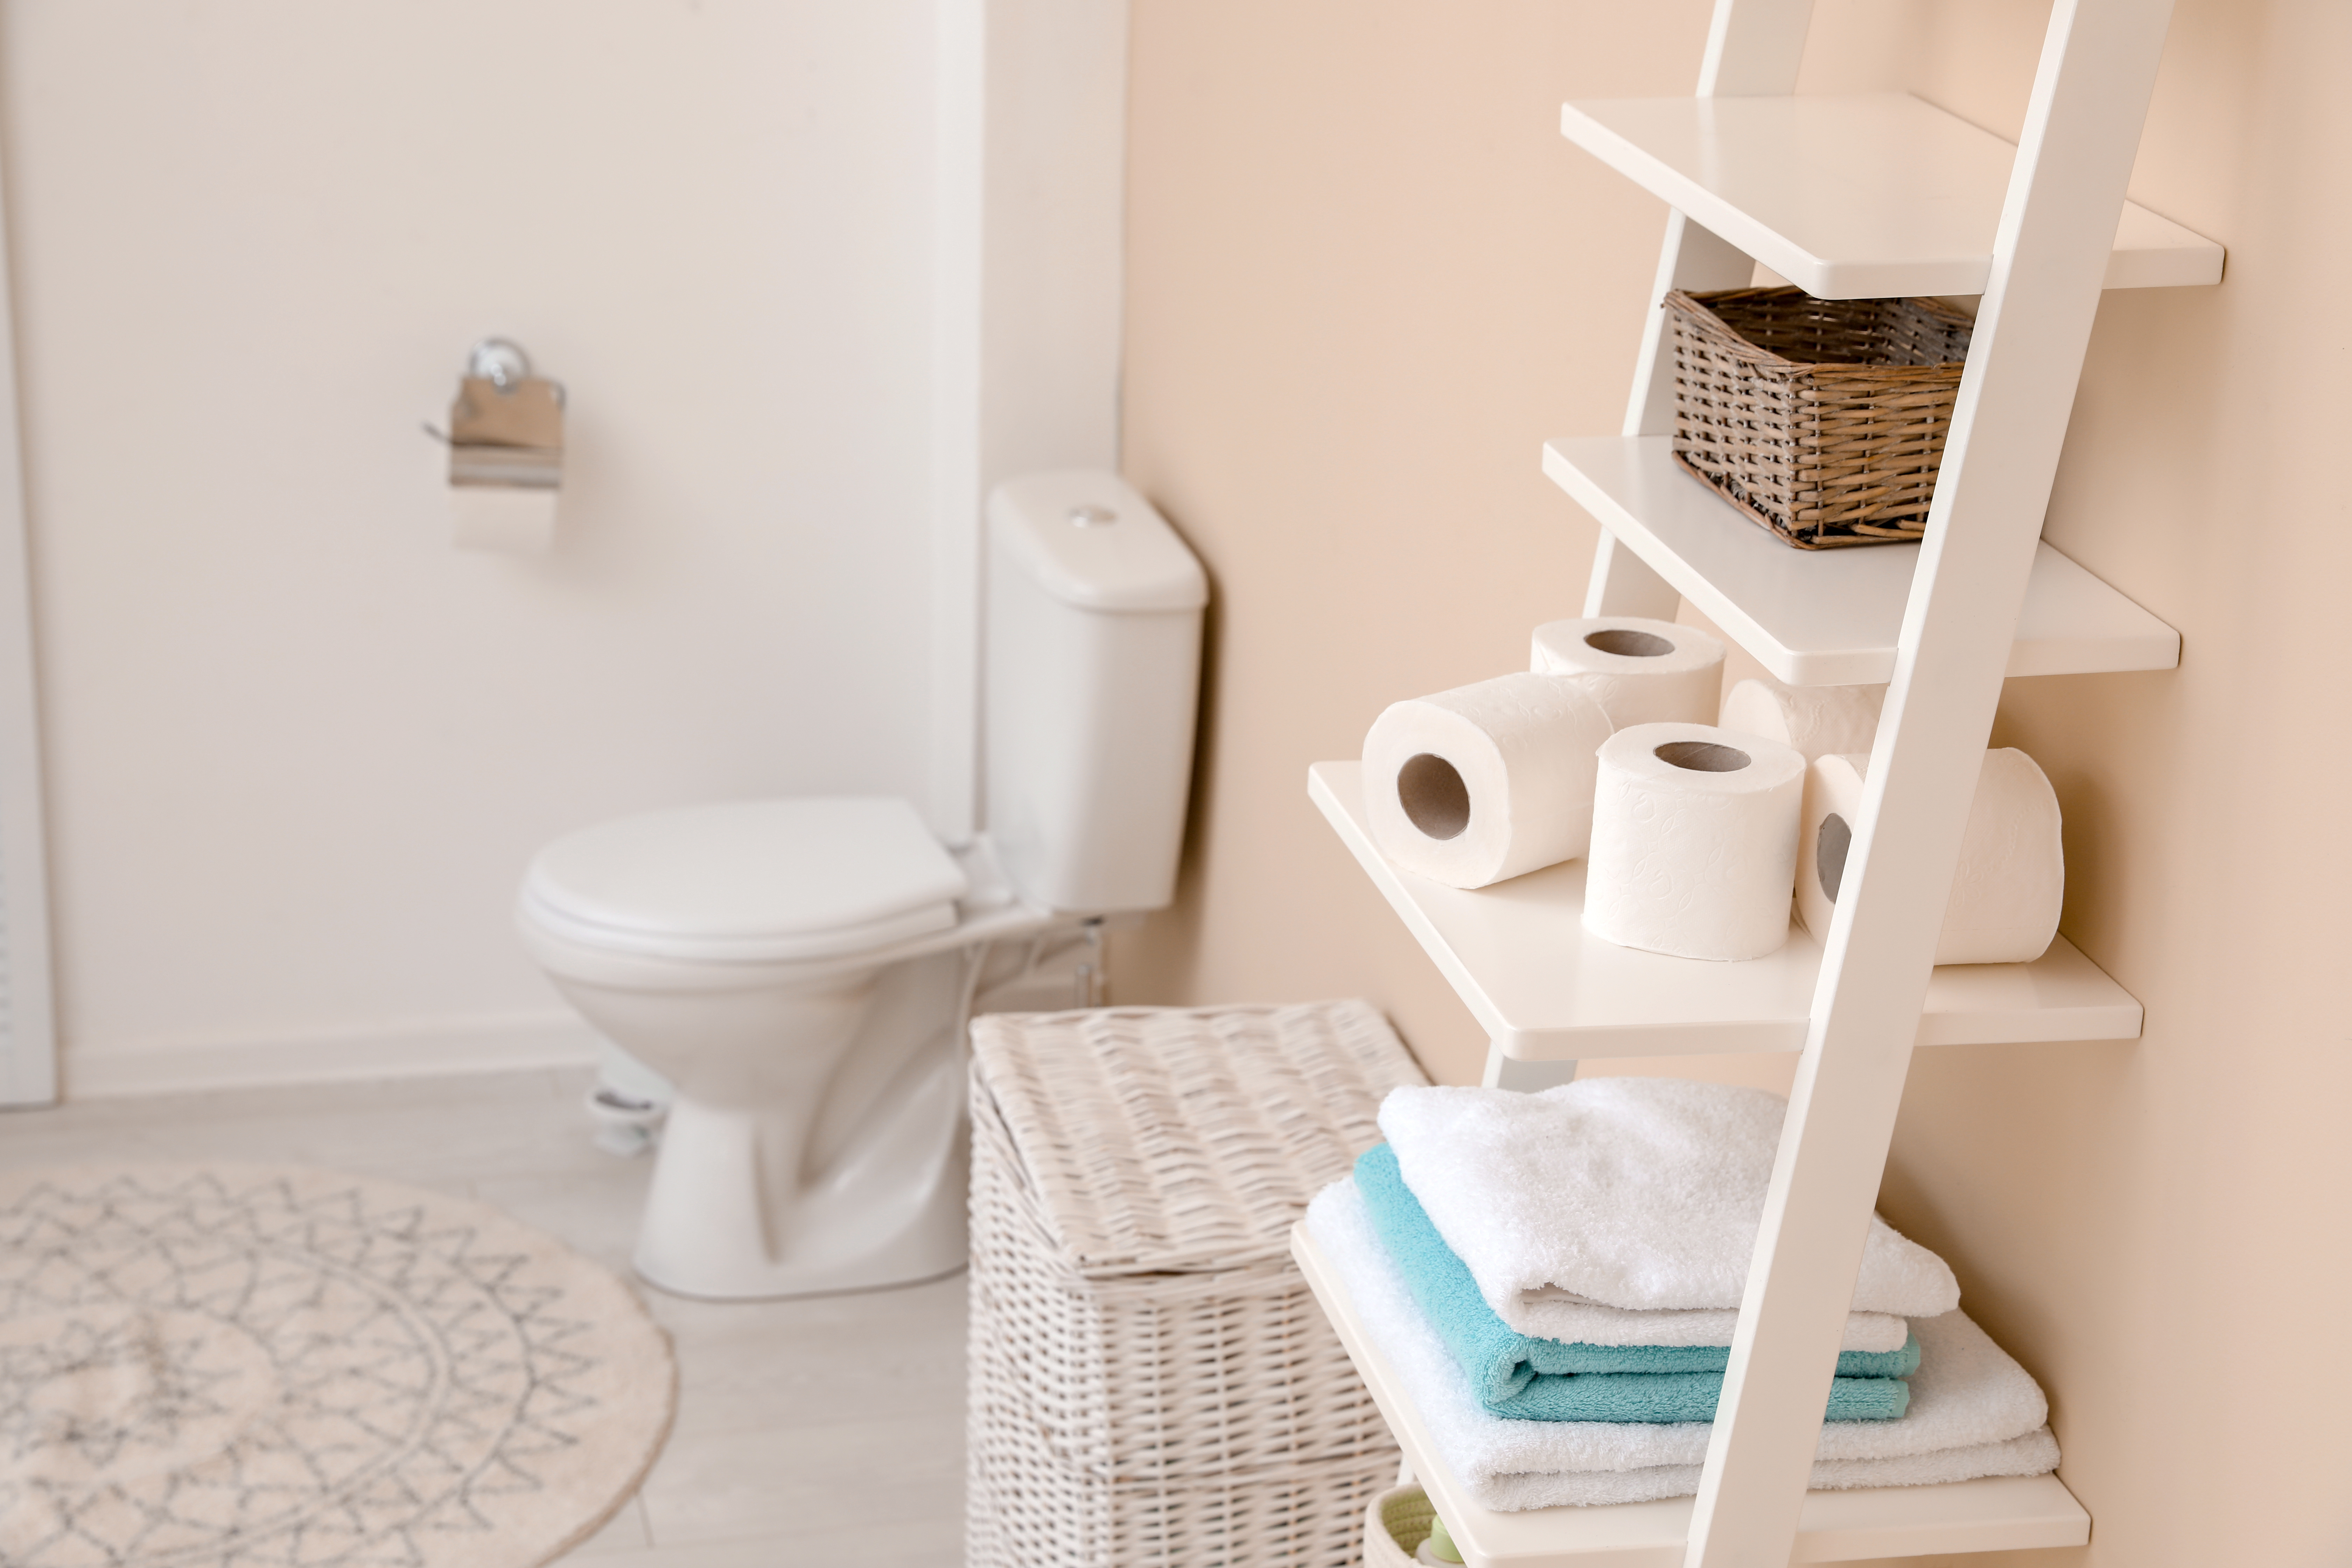 7 Small Bathroom Decorating Ideas To Save Space Ltd Commodities